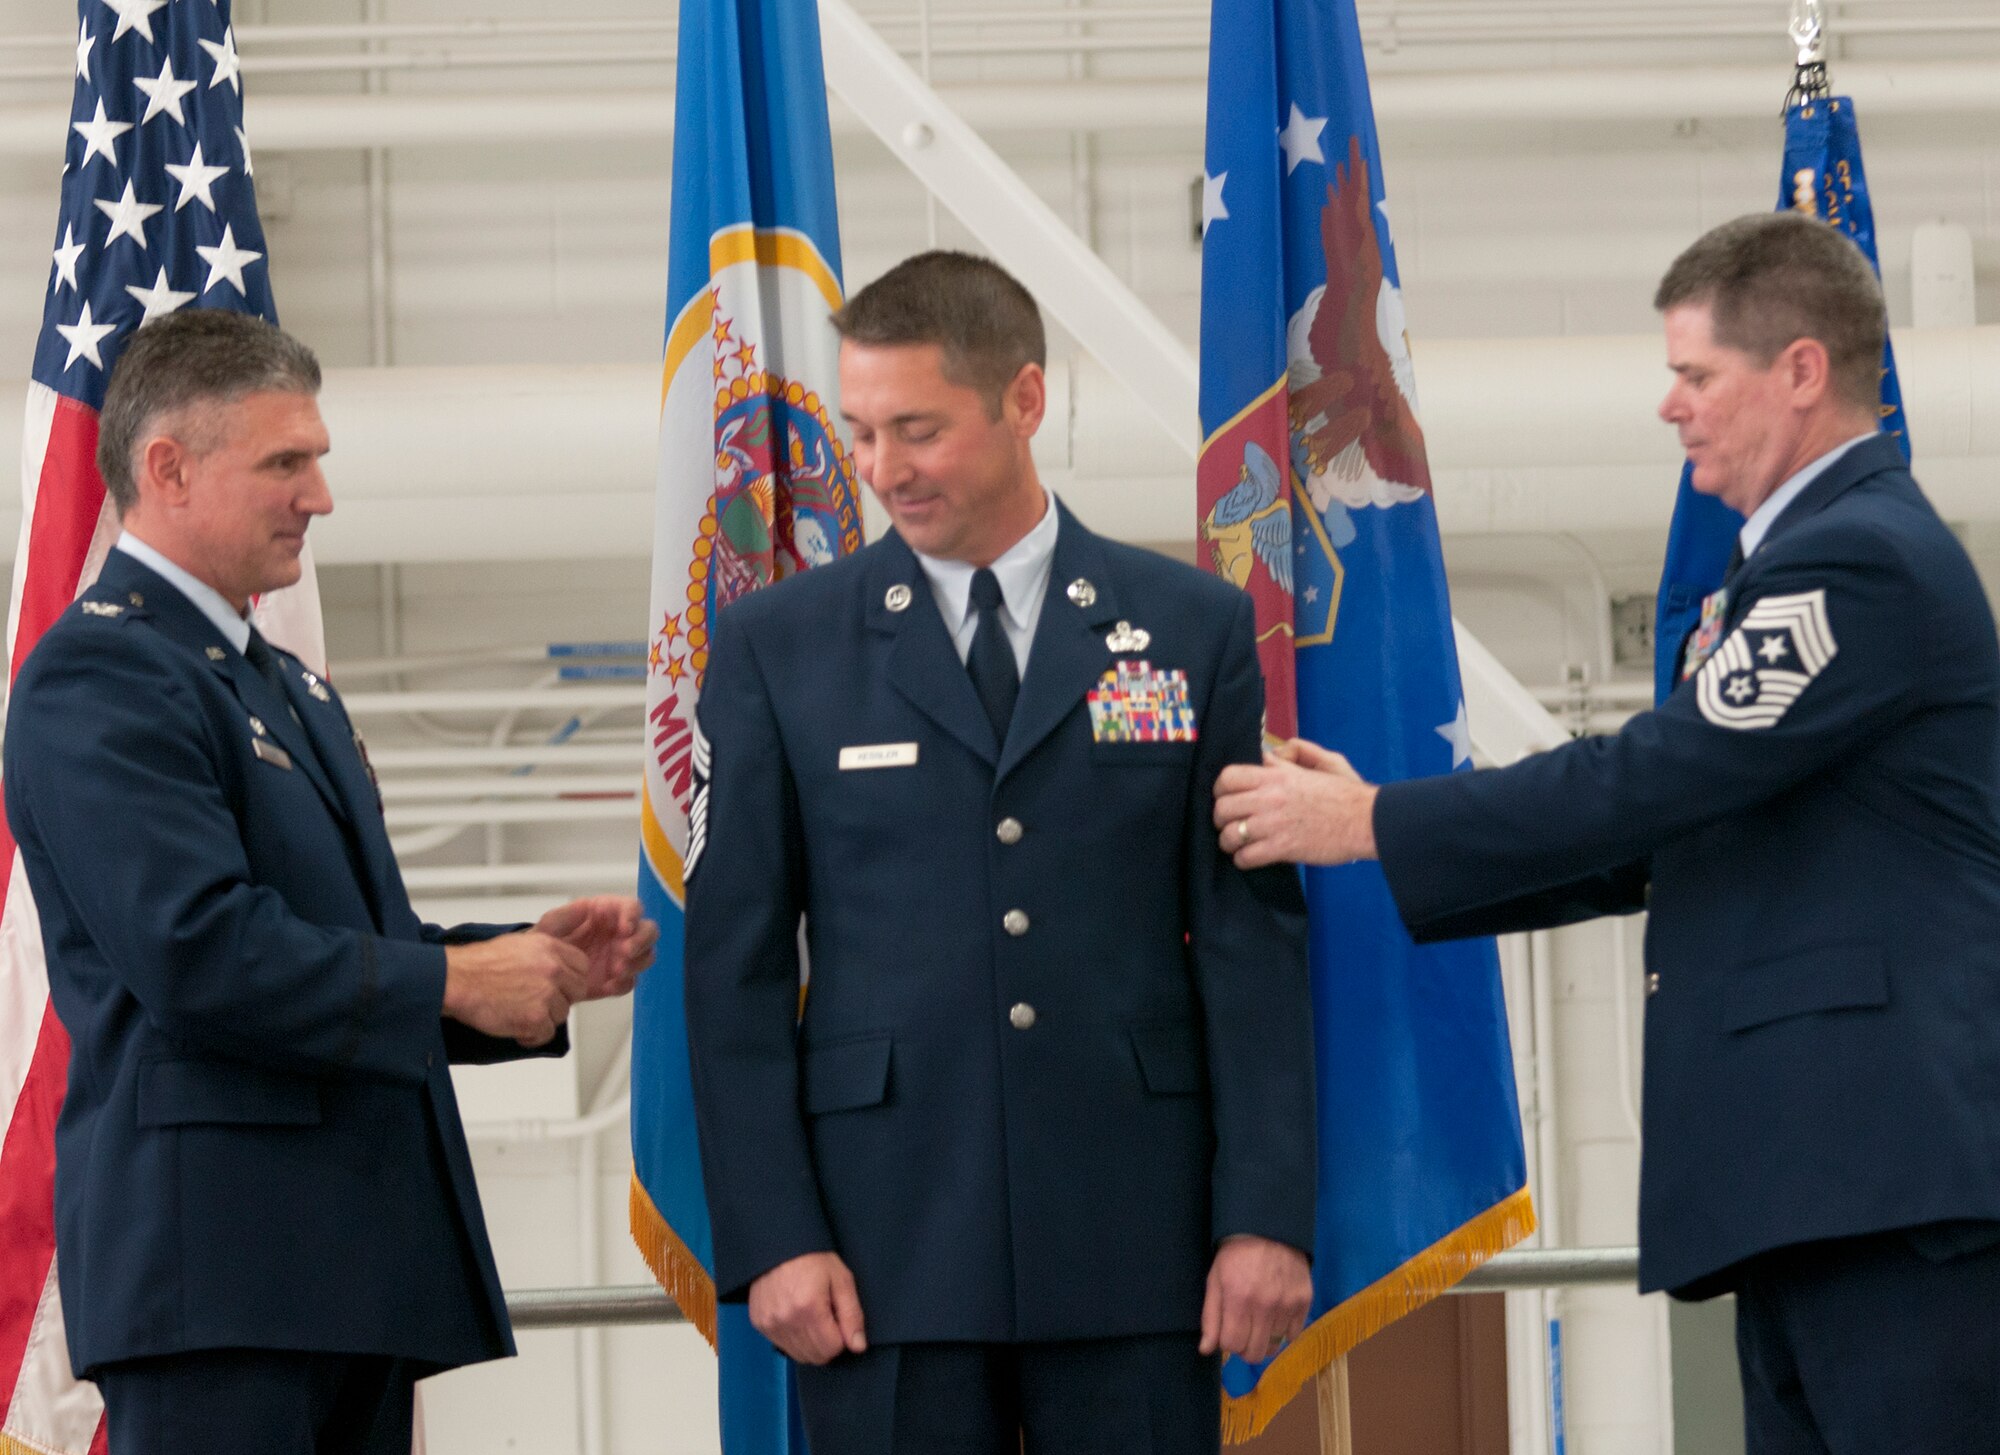 Chief Master Sgt. Paul Kessler (center), 133rd Communications Flight, becomes the Command Chief of the 133rd Airlift Wing, Minnesota Air National Guard, during a change of authority ceremony at the Air Guard base in St. Paul, Minn. on Oct. 15, 2011. He was selected by Col. Greg Haase (left), 133rd AW commander, to replace Chief Master Sgt. David Speich, 133rd Civil Engineer Squadron, who has served as the top enlisted member of the Wing for the past three and a half years. Minnesota Air National Guard Command Chief, Chief Master Sgt. Greg Close (right) assists by helping the commander reveal the star in the chevron, symbolizing the authority the new command chief holds as he serves the Airmen of the 133rd AW. USAF official photo by Tech. Sgt. Erik Gudmundson